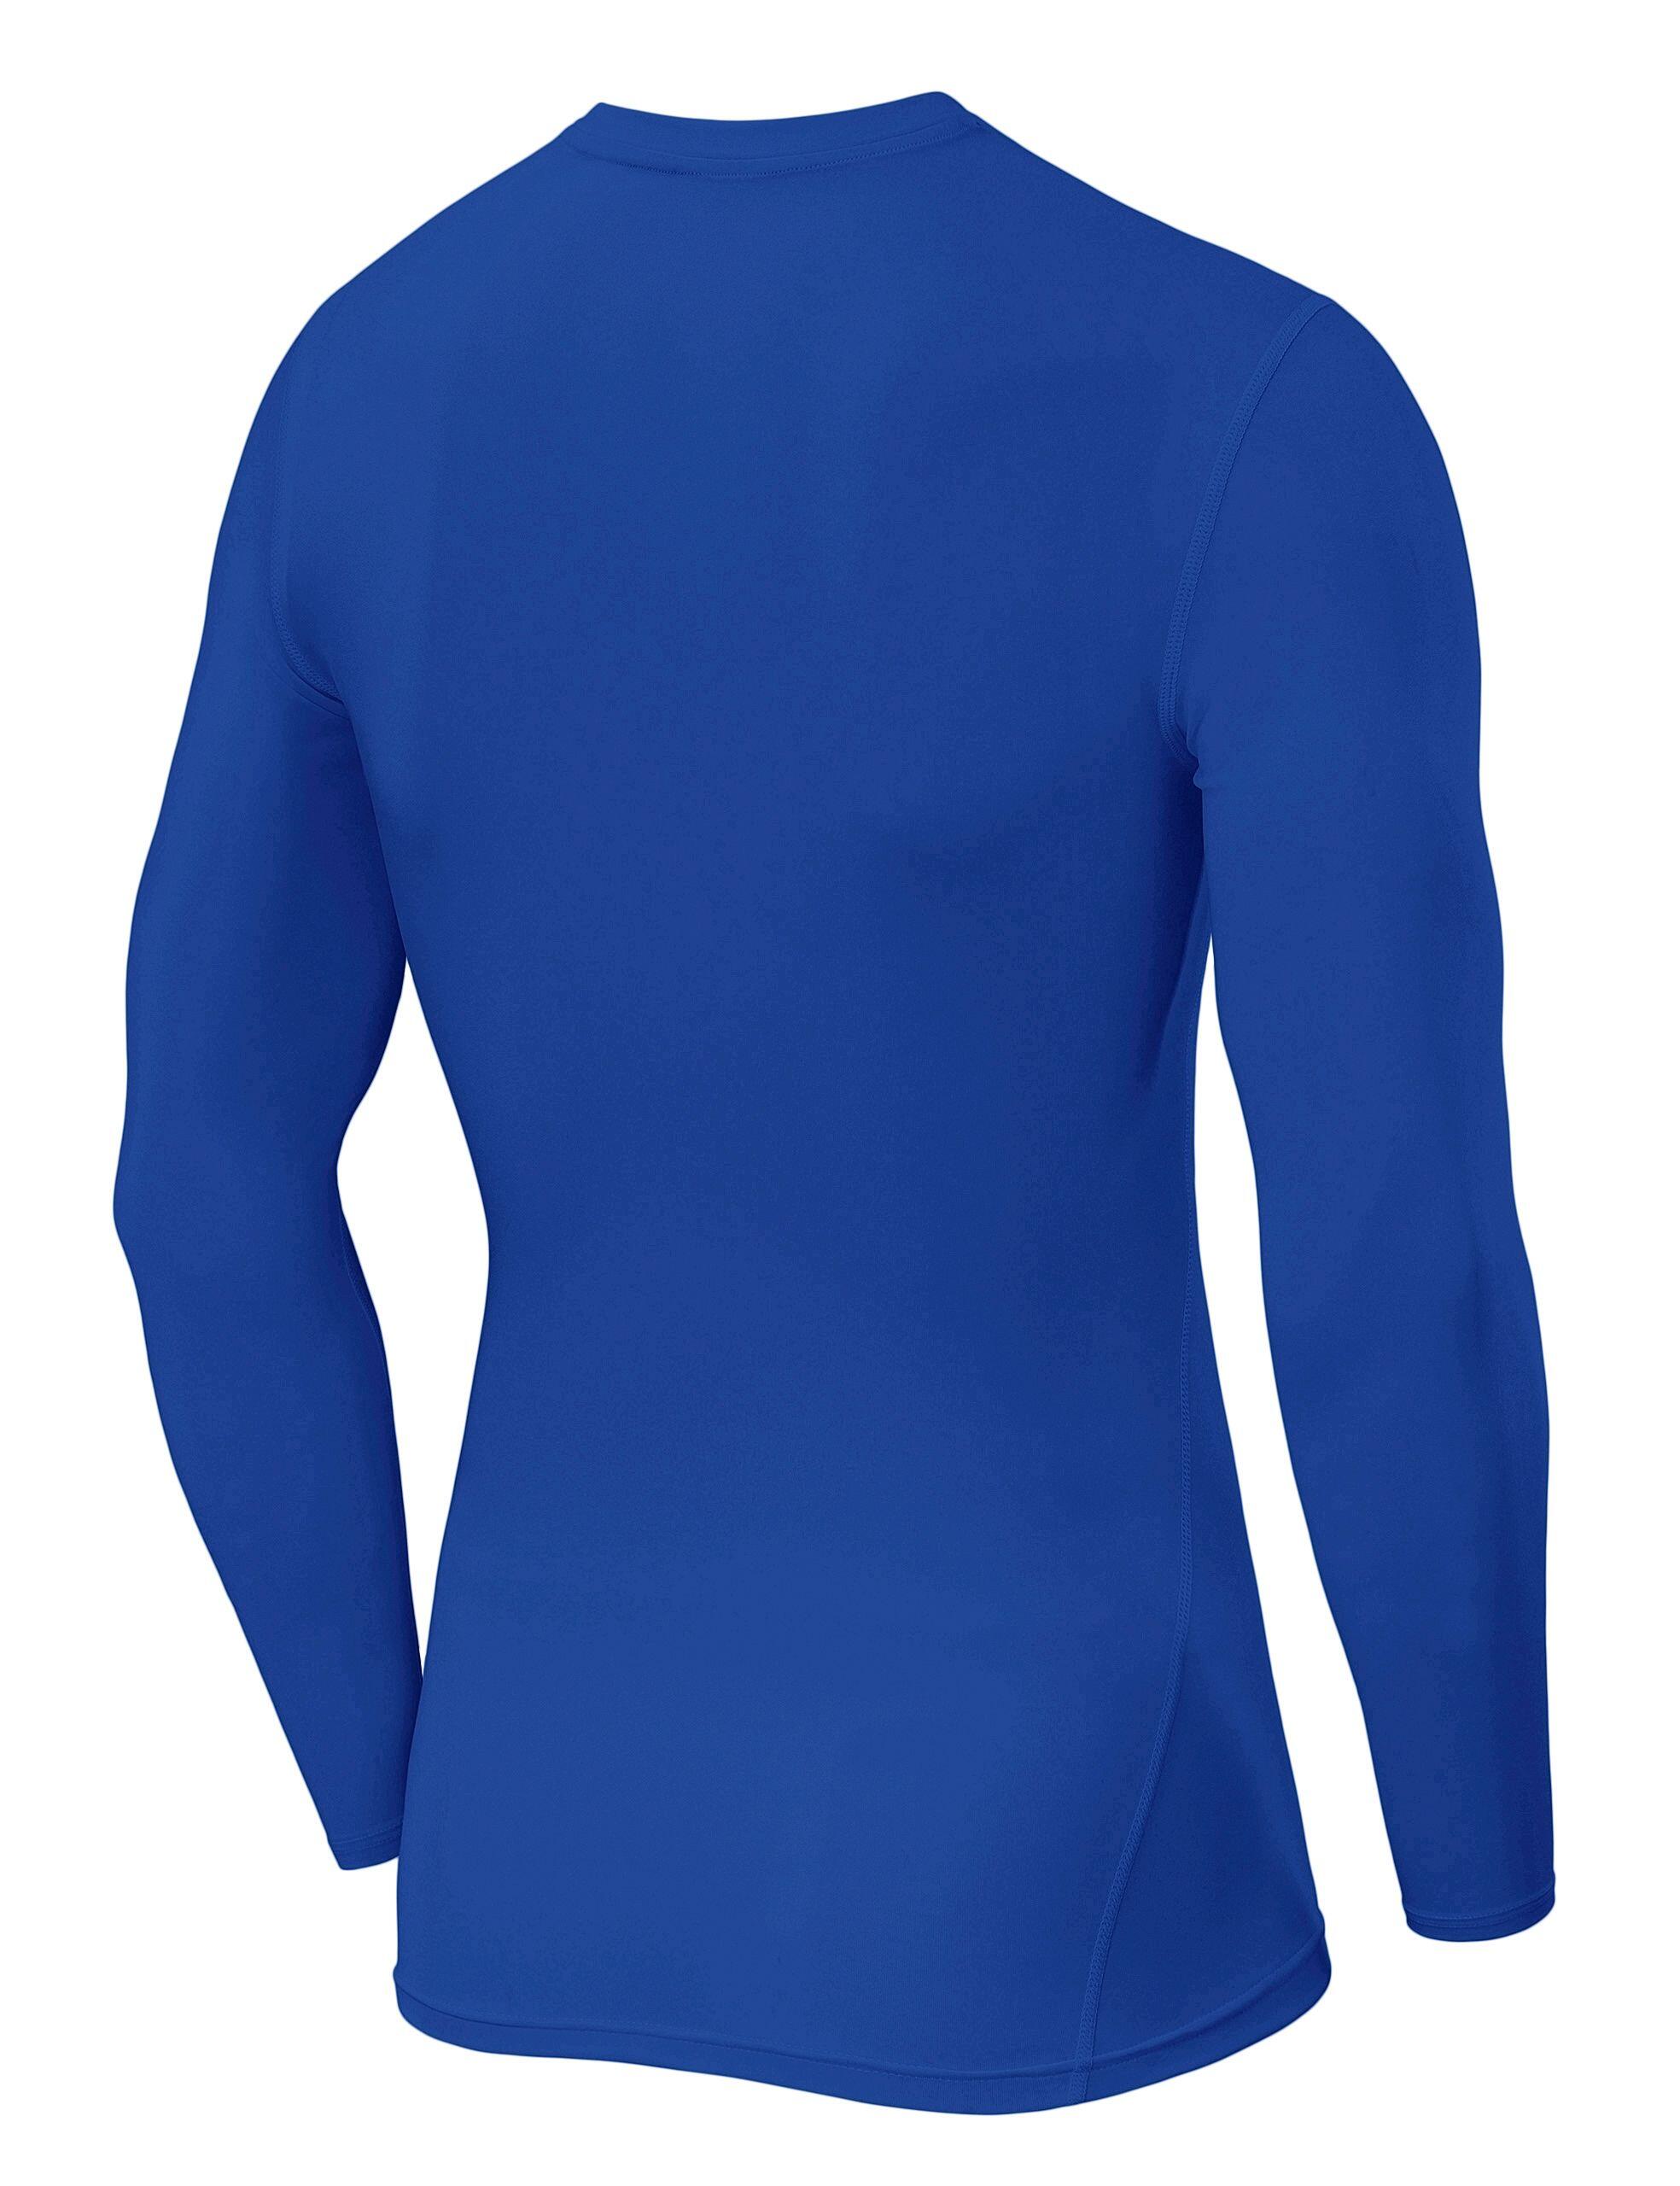 Boys' Performance Base Layer Compression Top - Dazzling Blue 3/5